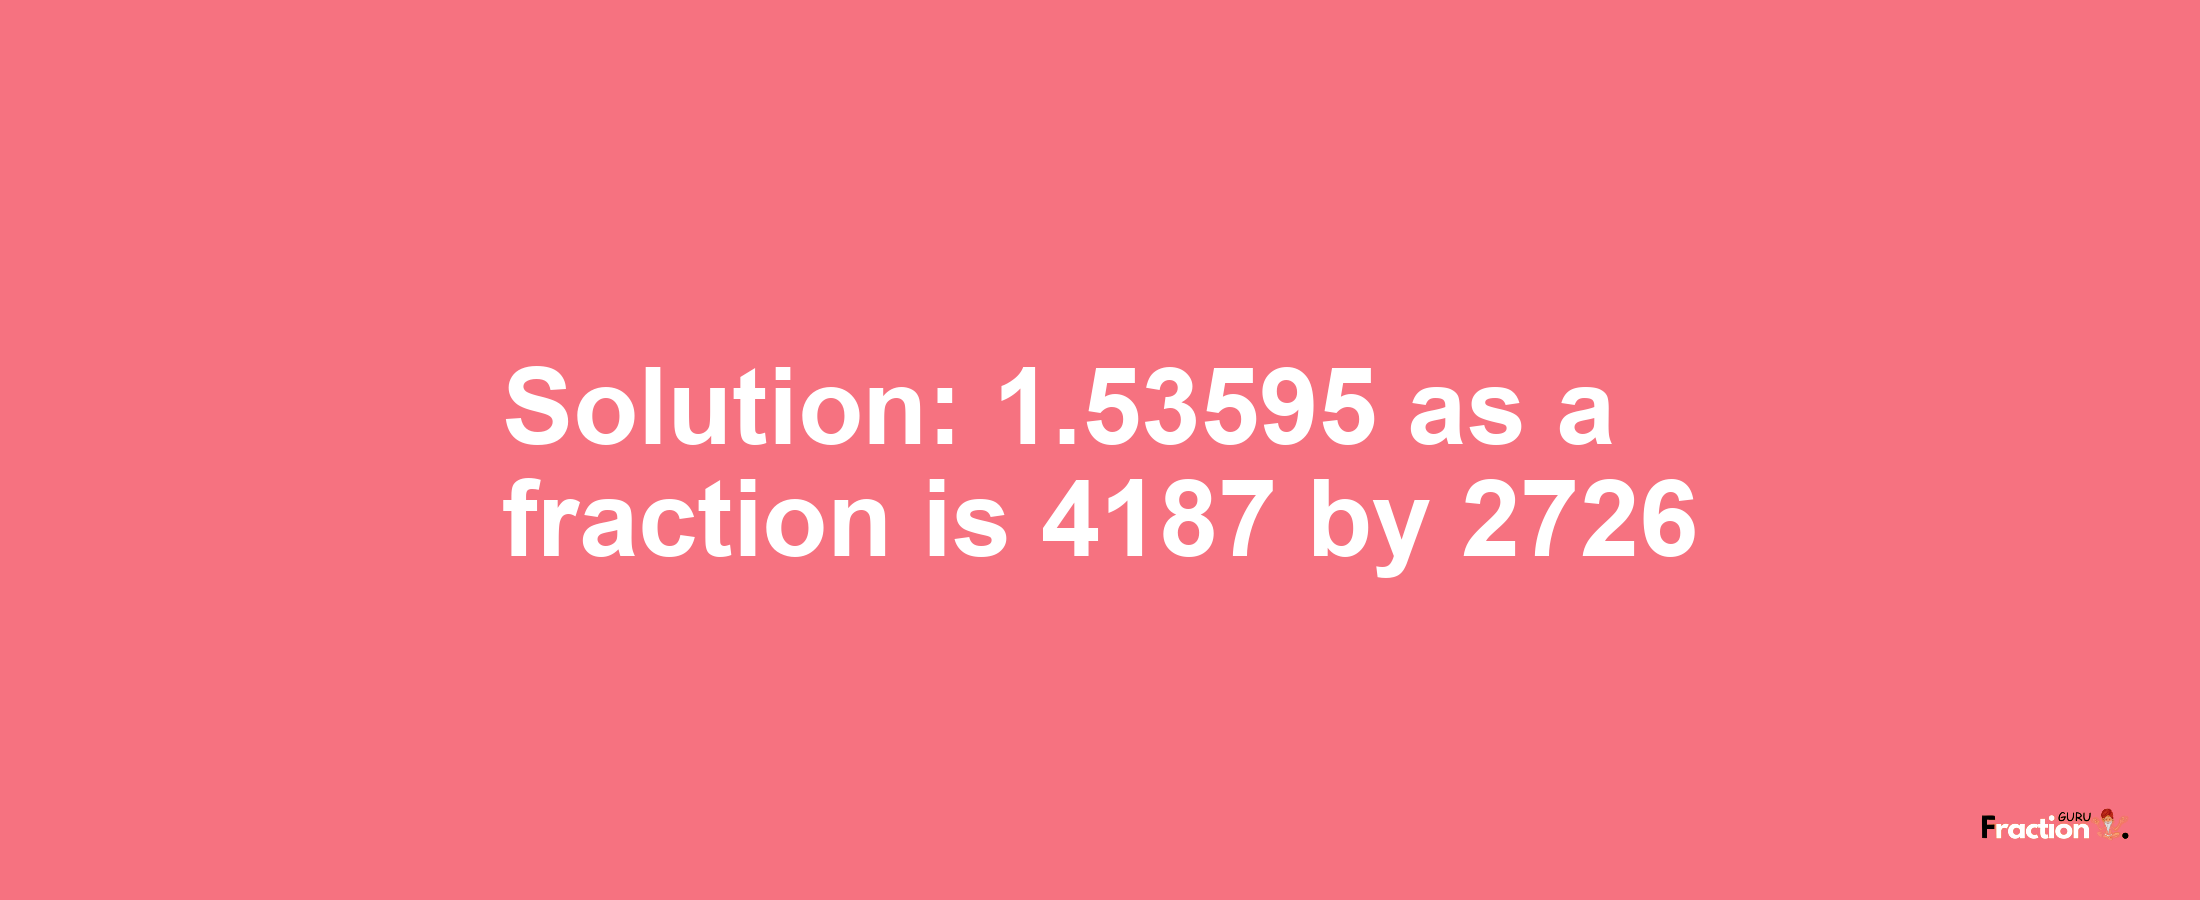 Solution:1.53595 as a fraction is 4187/2726